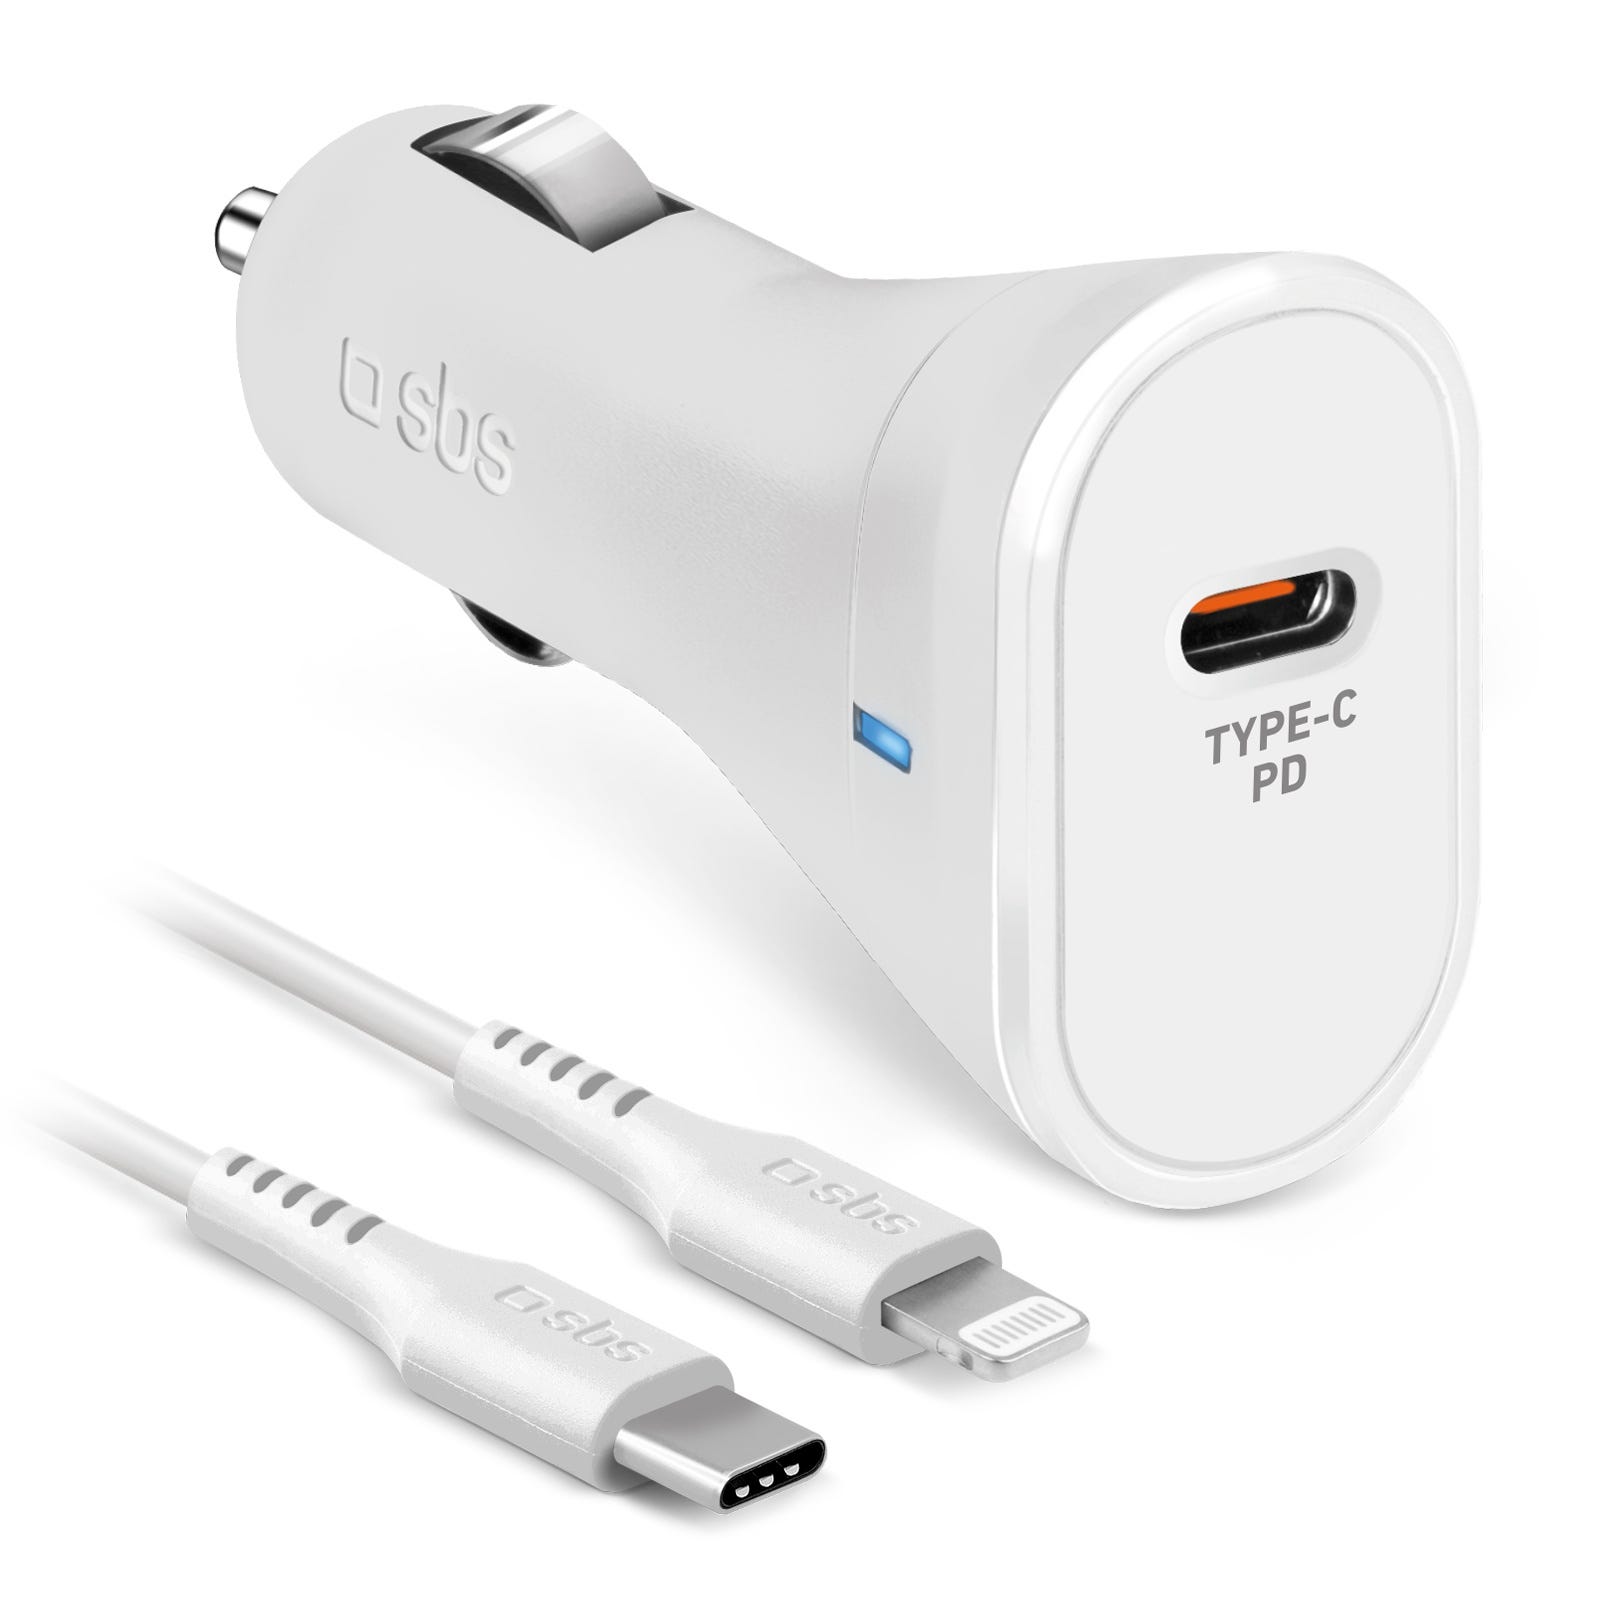 Chargeur voiture allume cigare intelligent 20W + câble Made For iPhone/iPad-  SBS